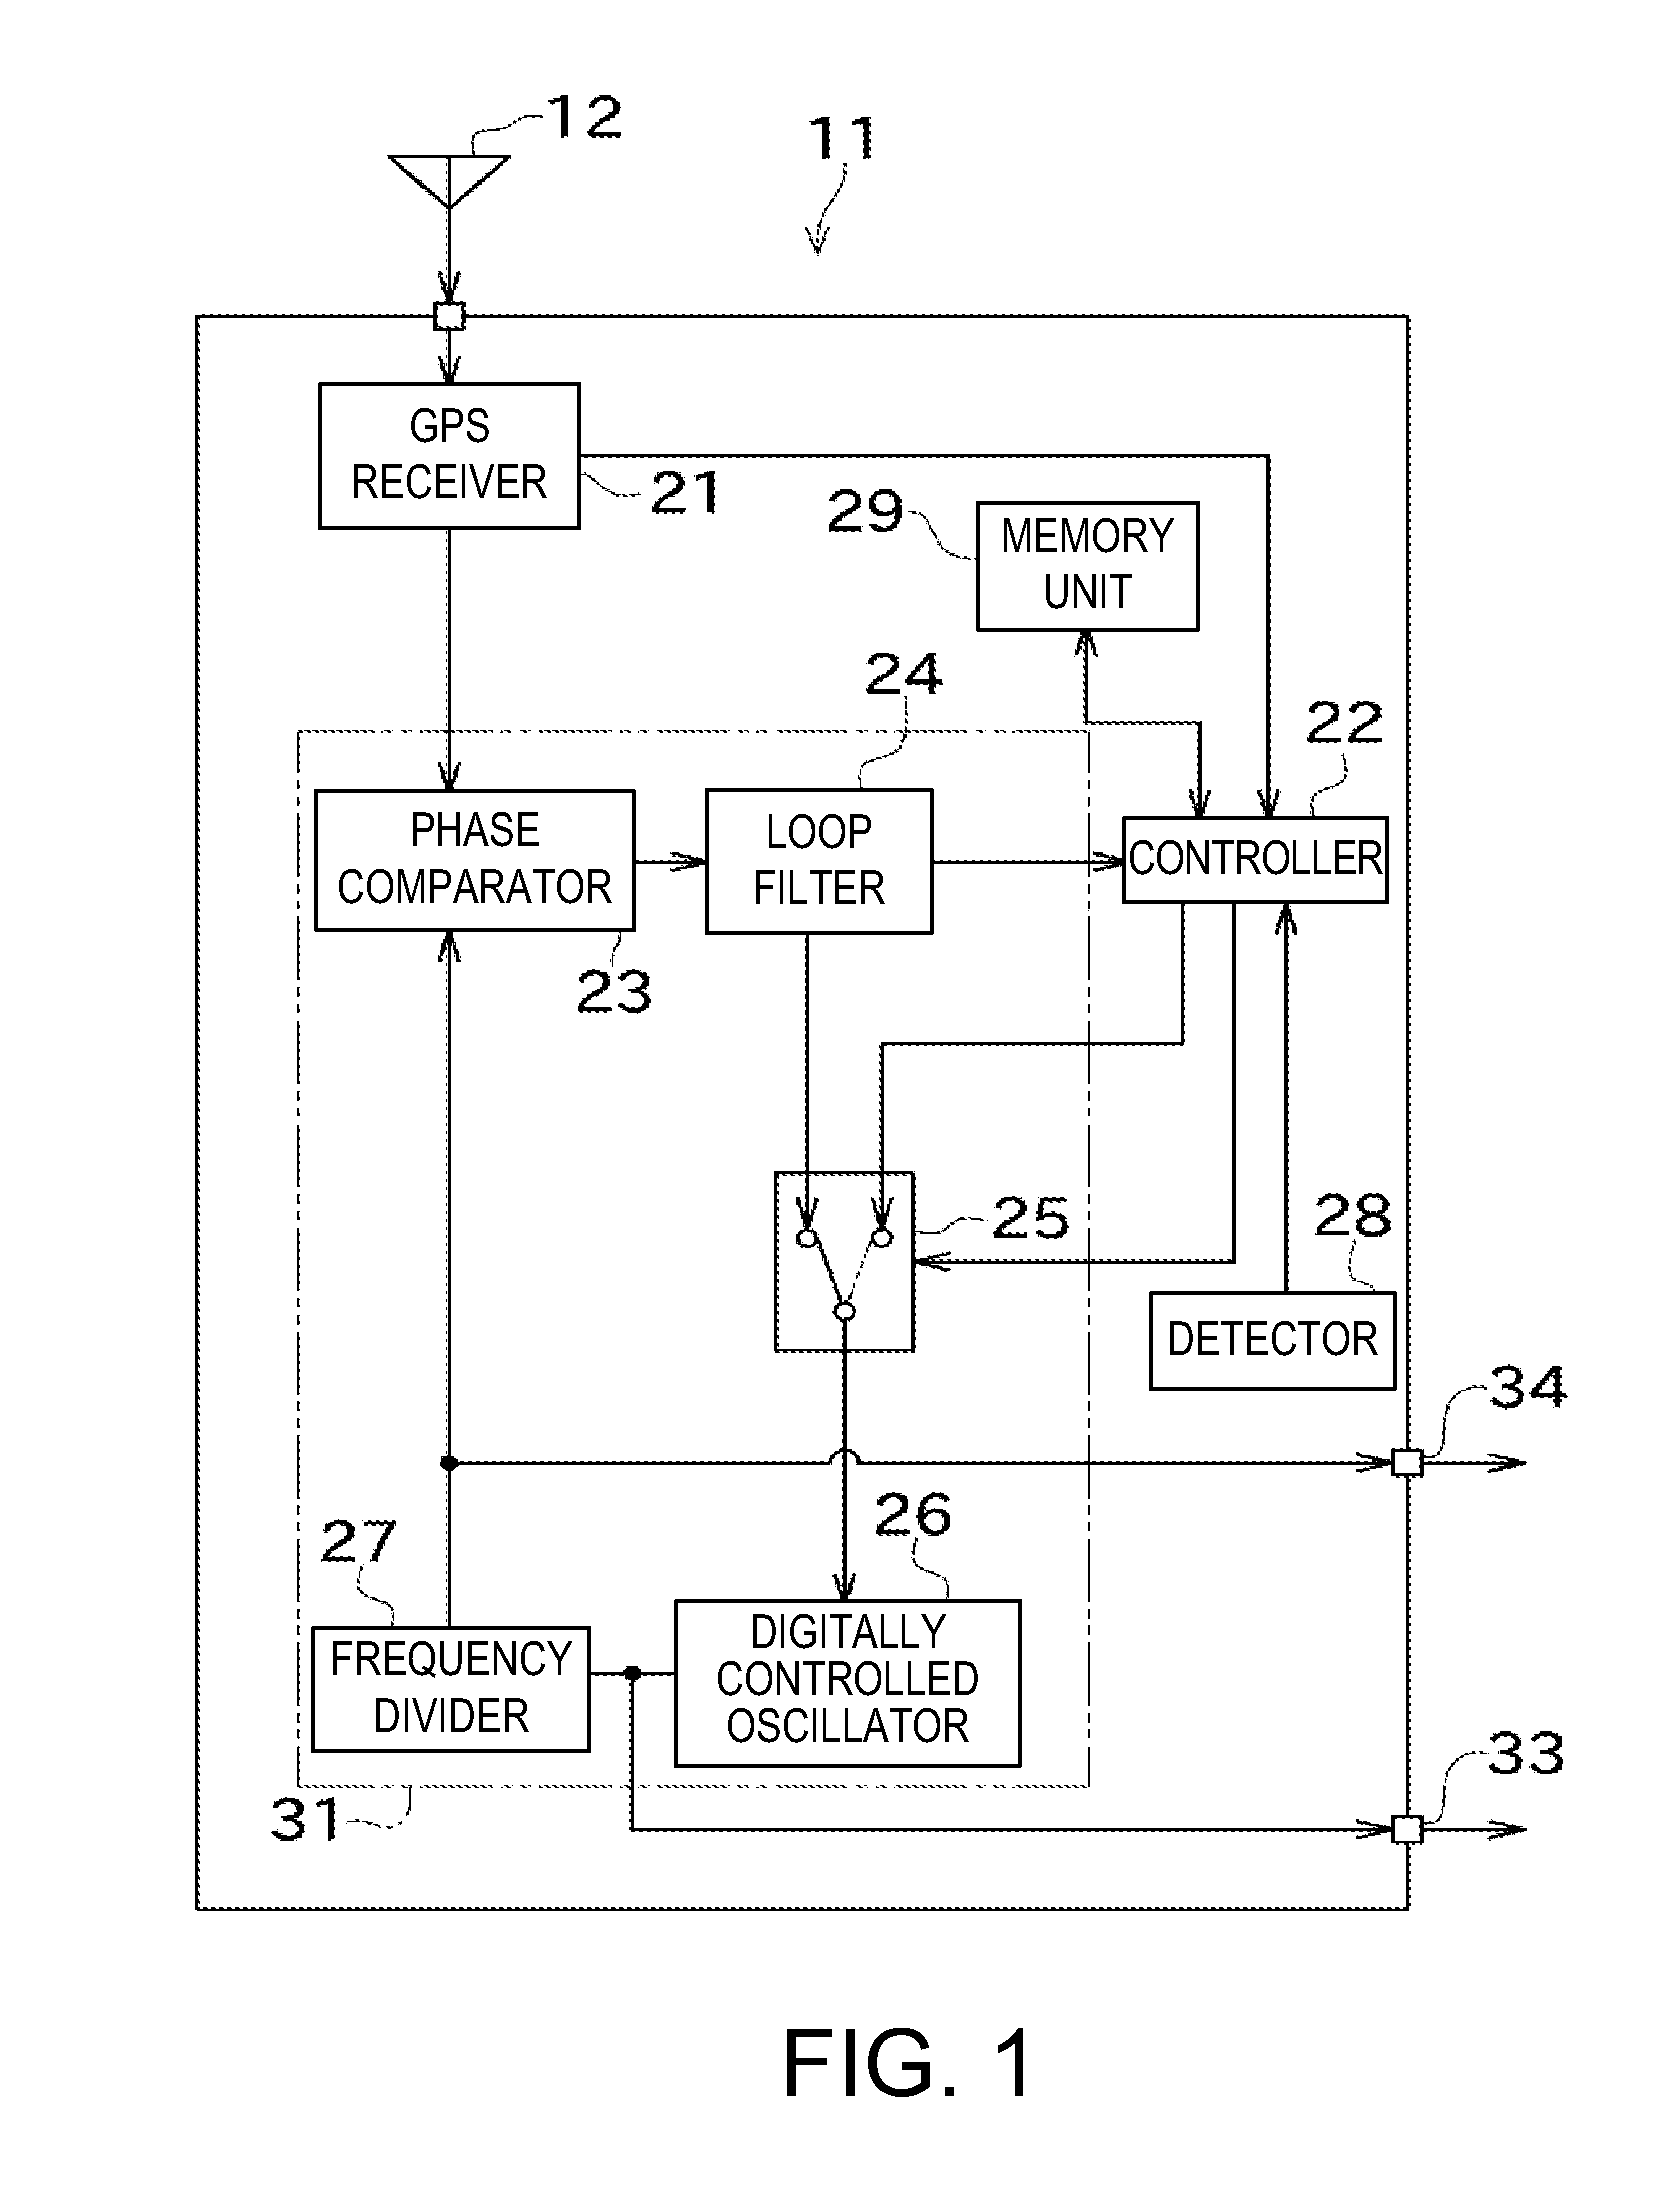 Reference frequency generating device